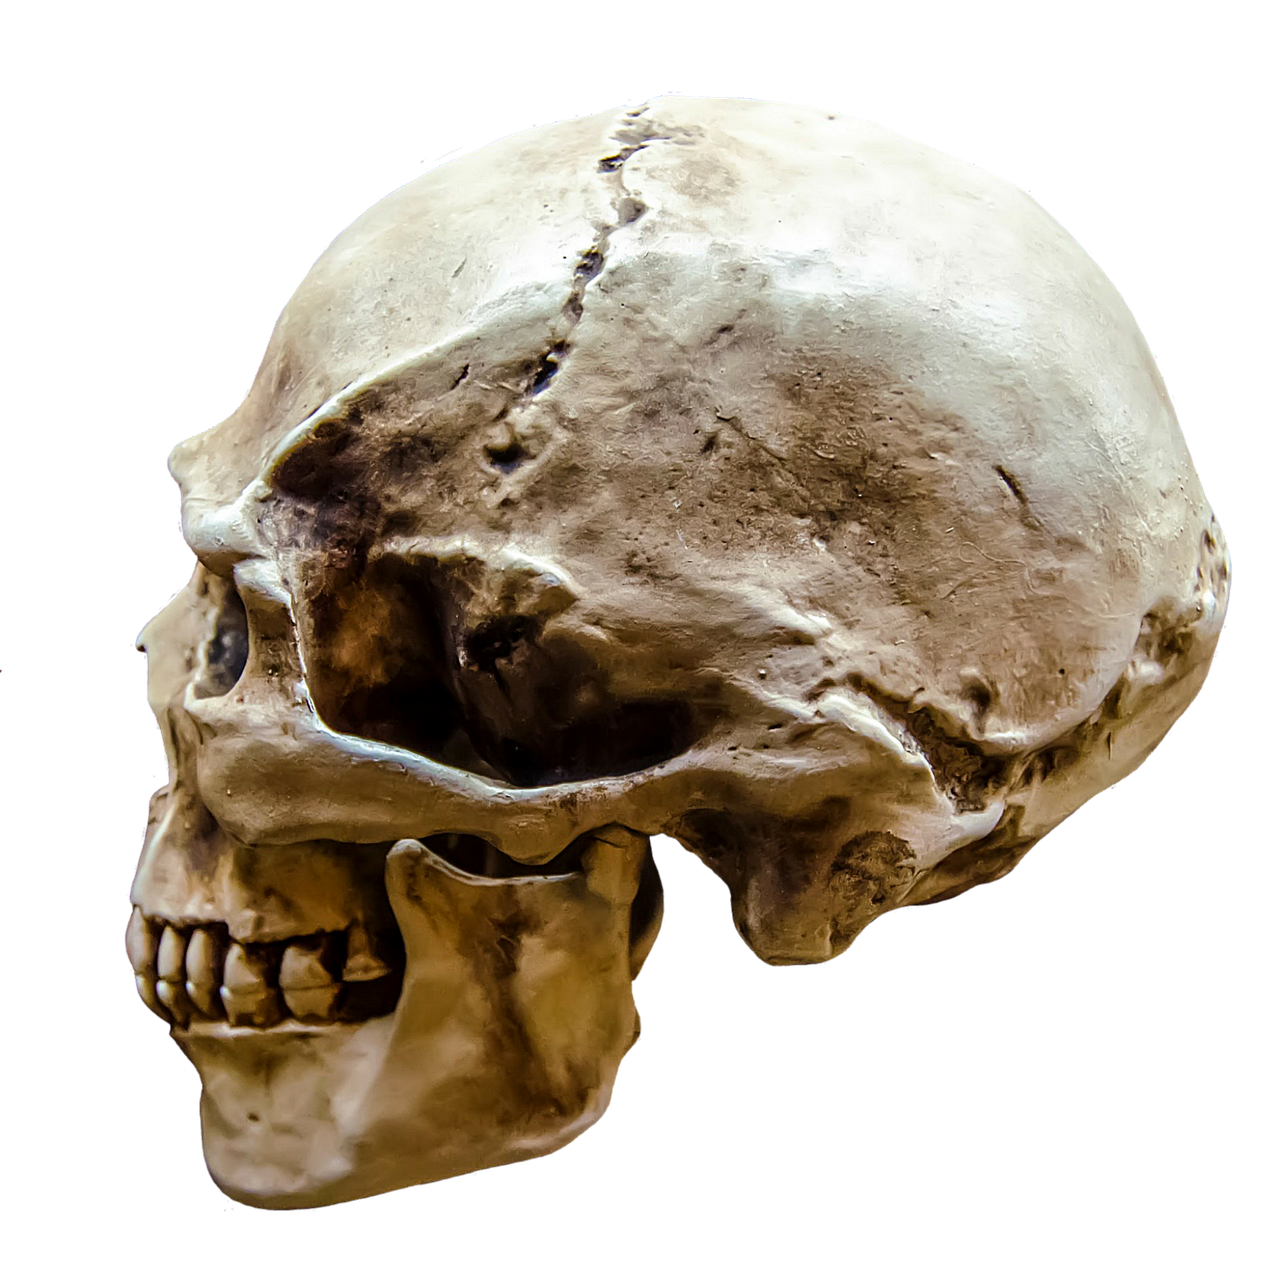 a close up of a human skull on a black background, shutterstock, side view profile centered, jpeg artifact, neanderthal people, prosthetics